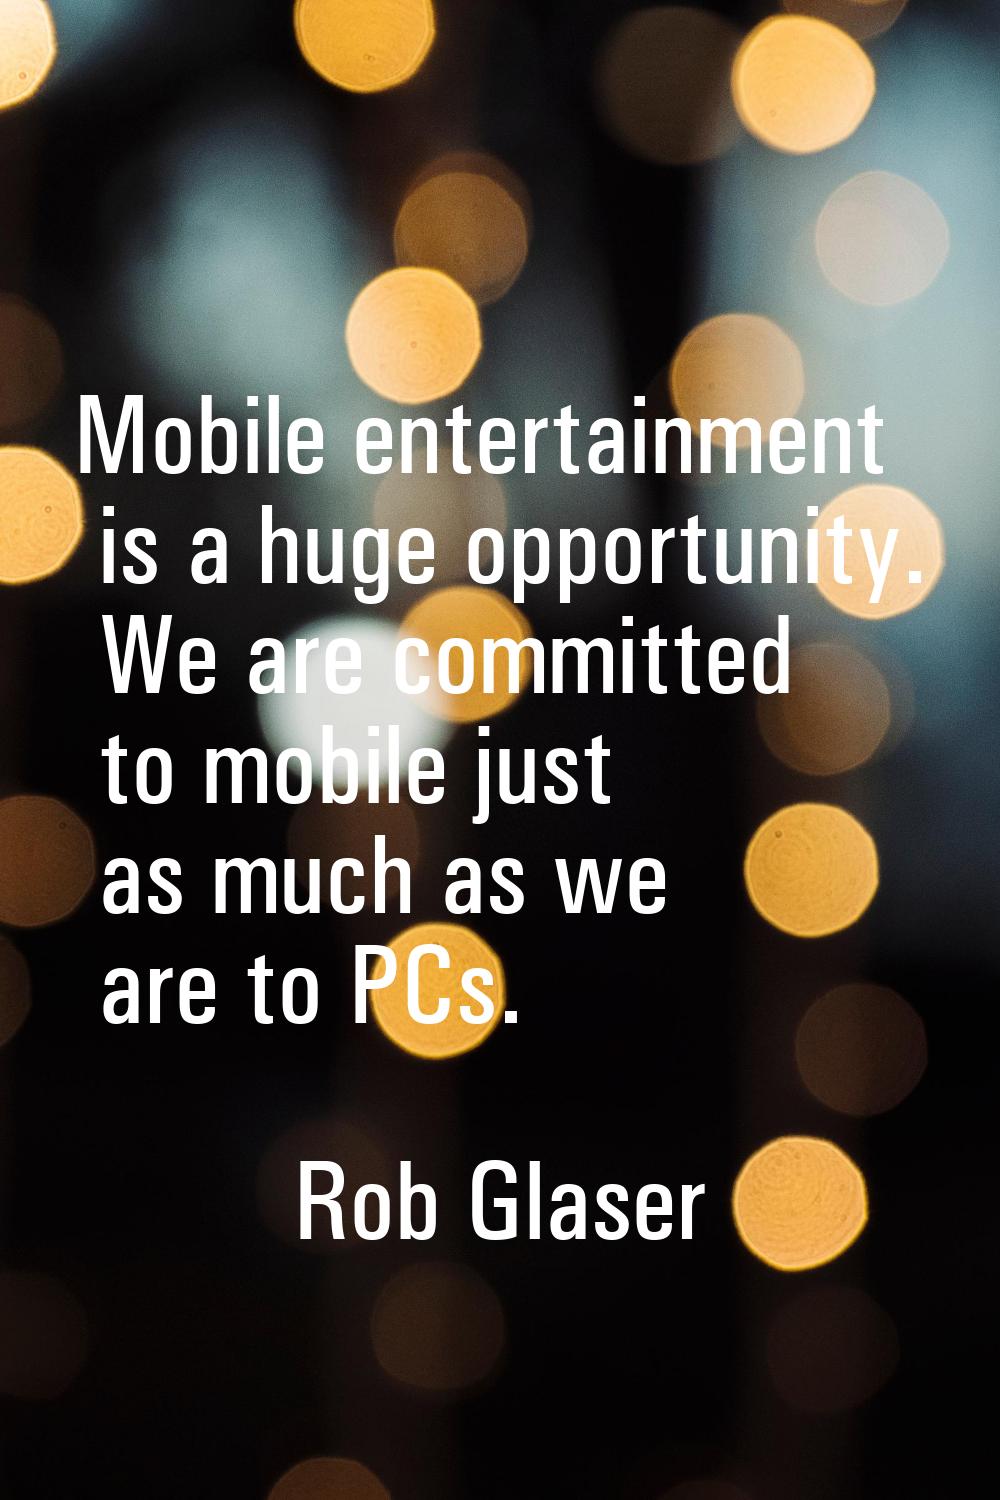 Mobile entertainment is a huge opportunity. We are committed to mobile just as much as we are to PC